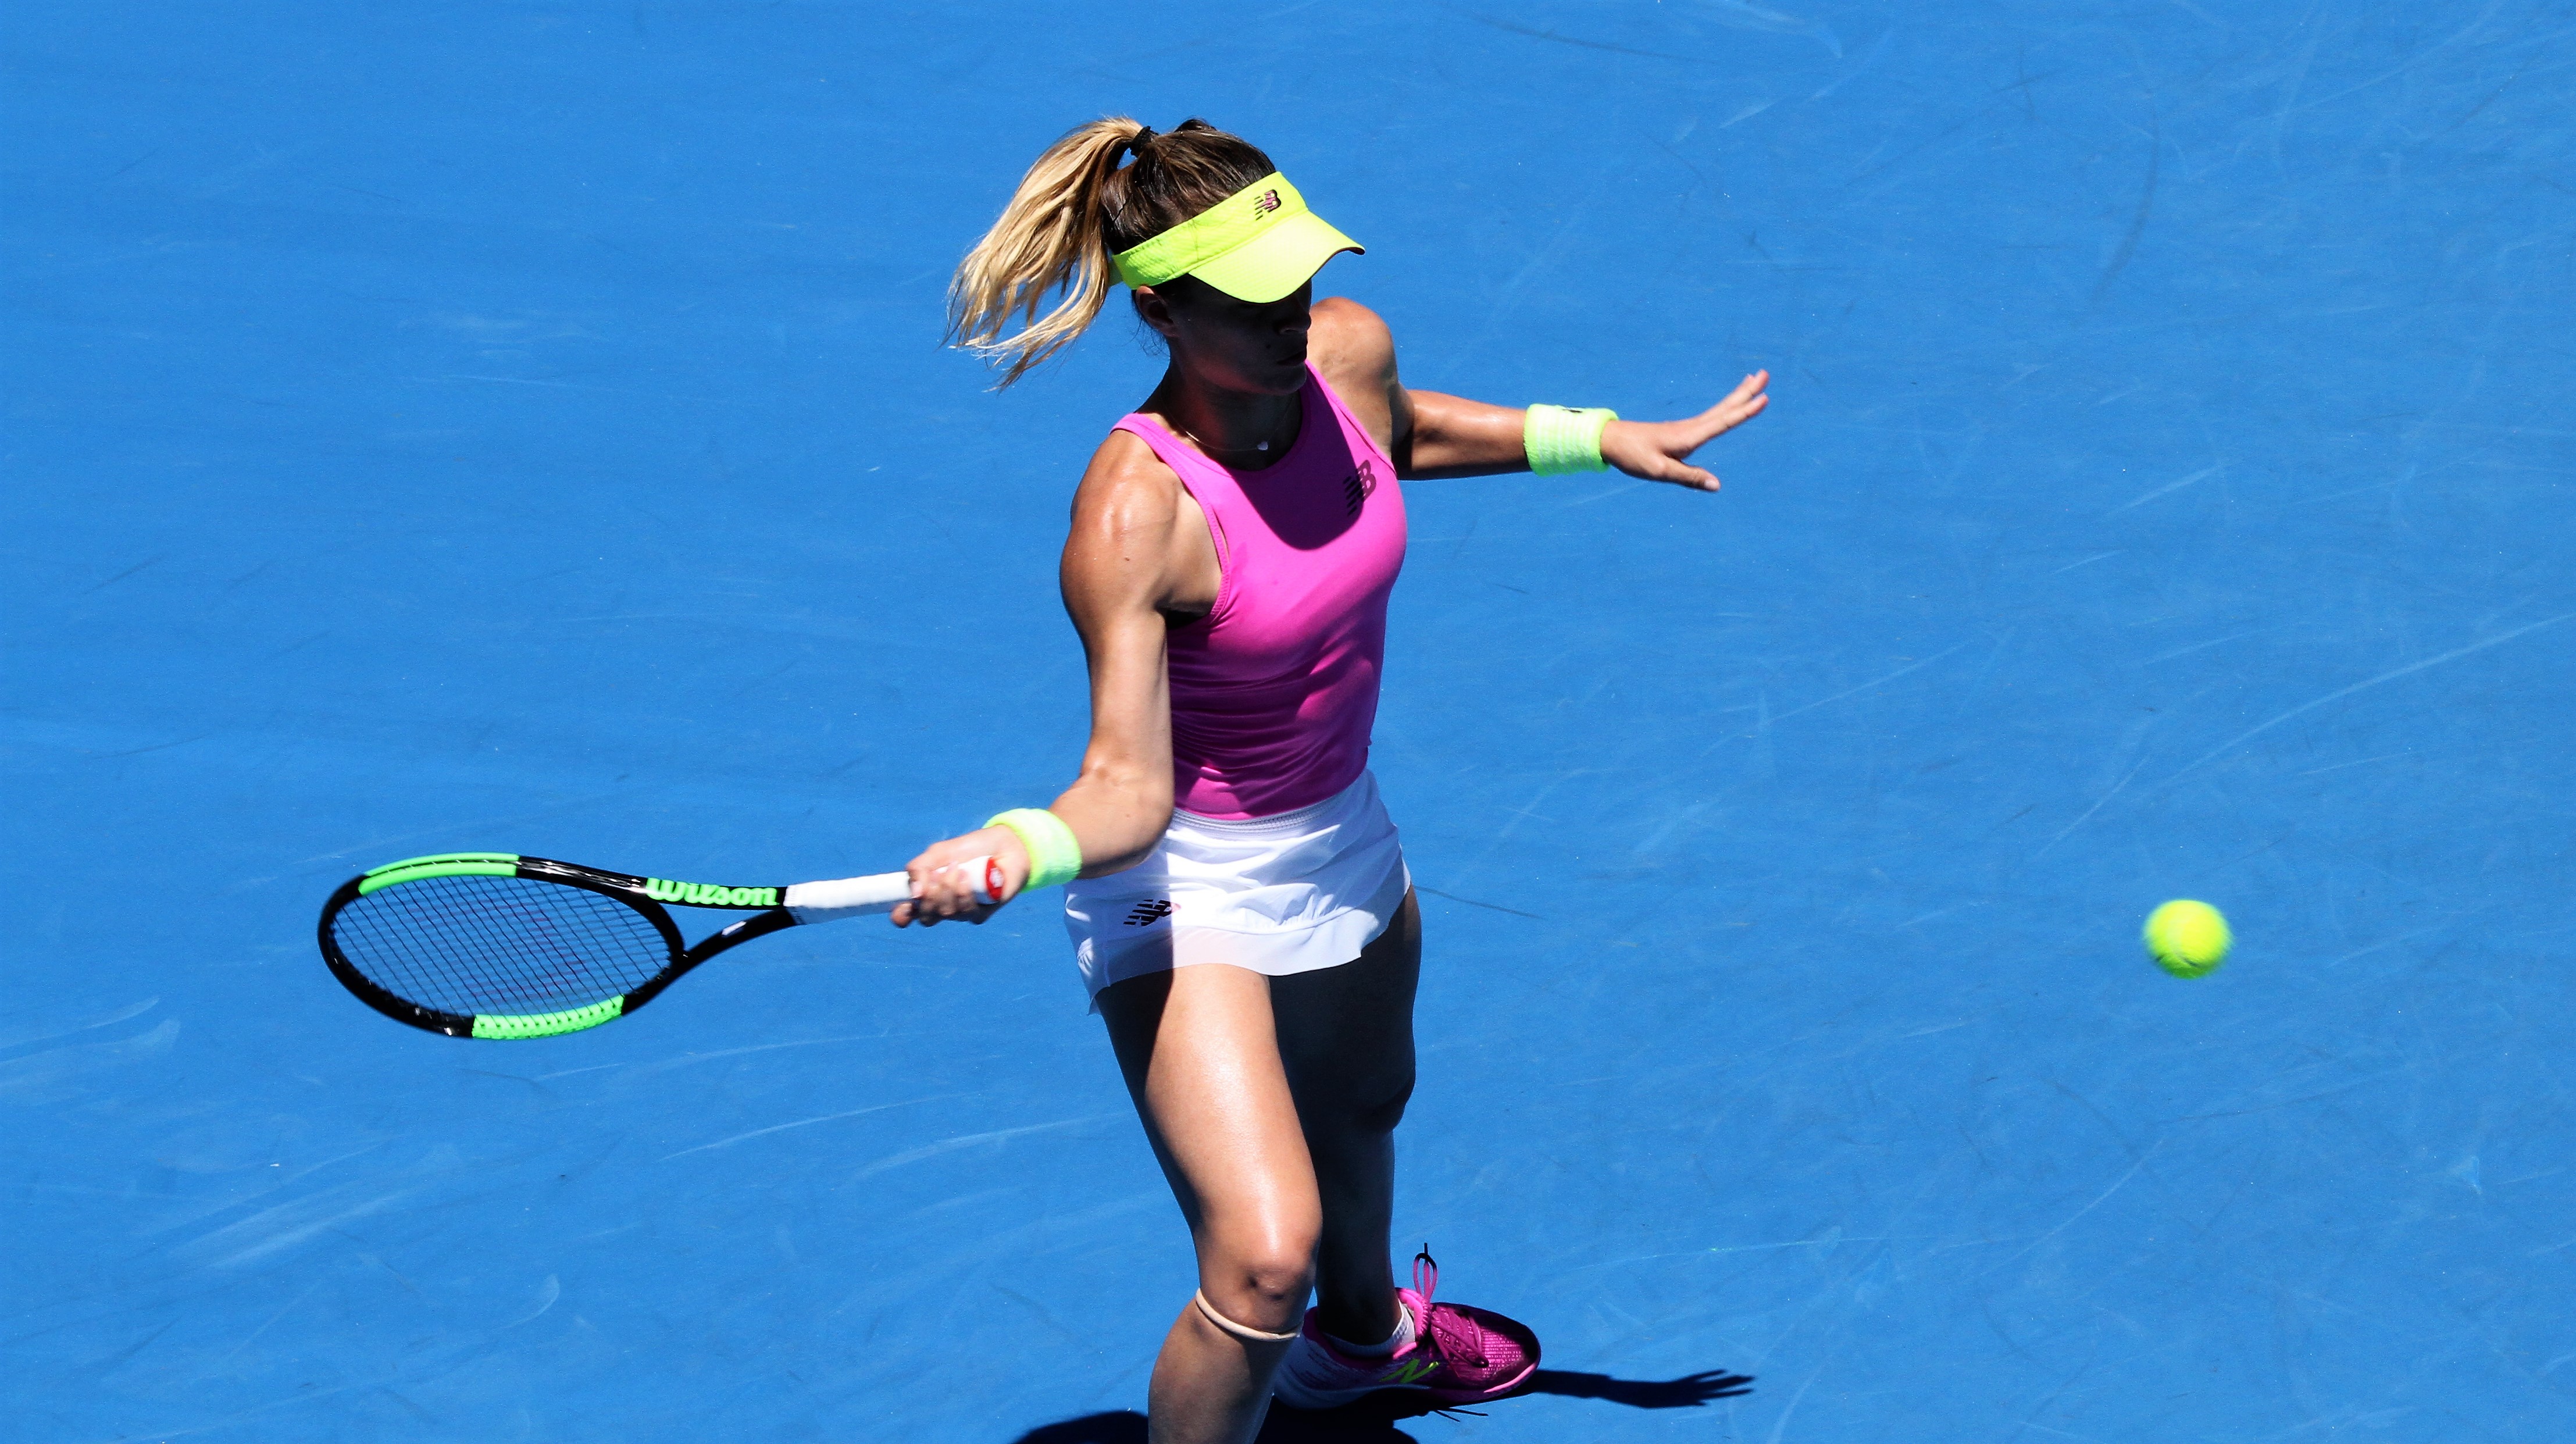 ON THE ATTACK: Nicole Gibbs played an aggressive game against Ash Barty but couldn't get a win.